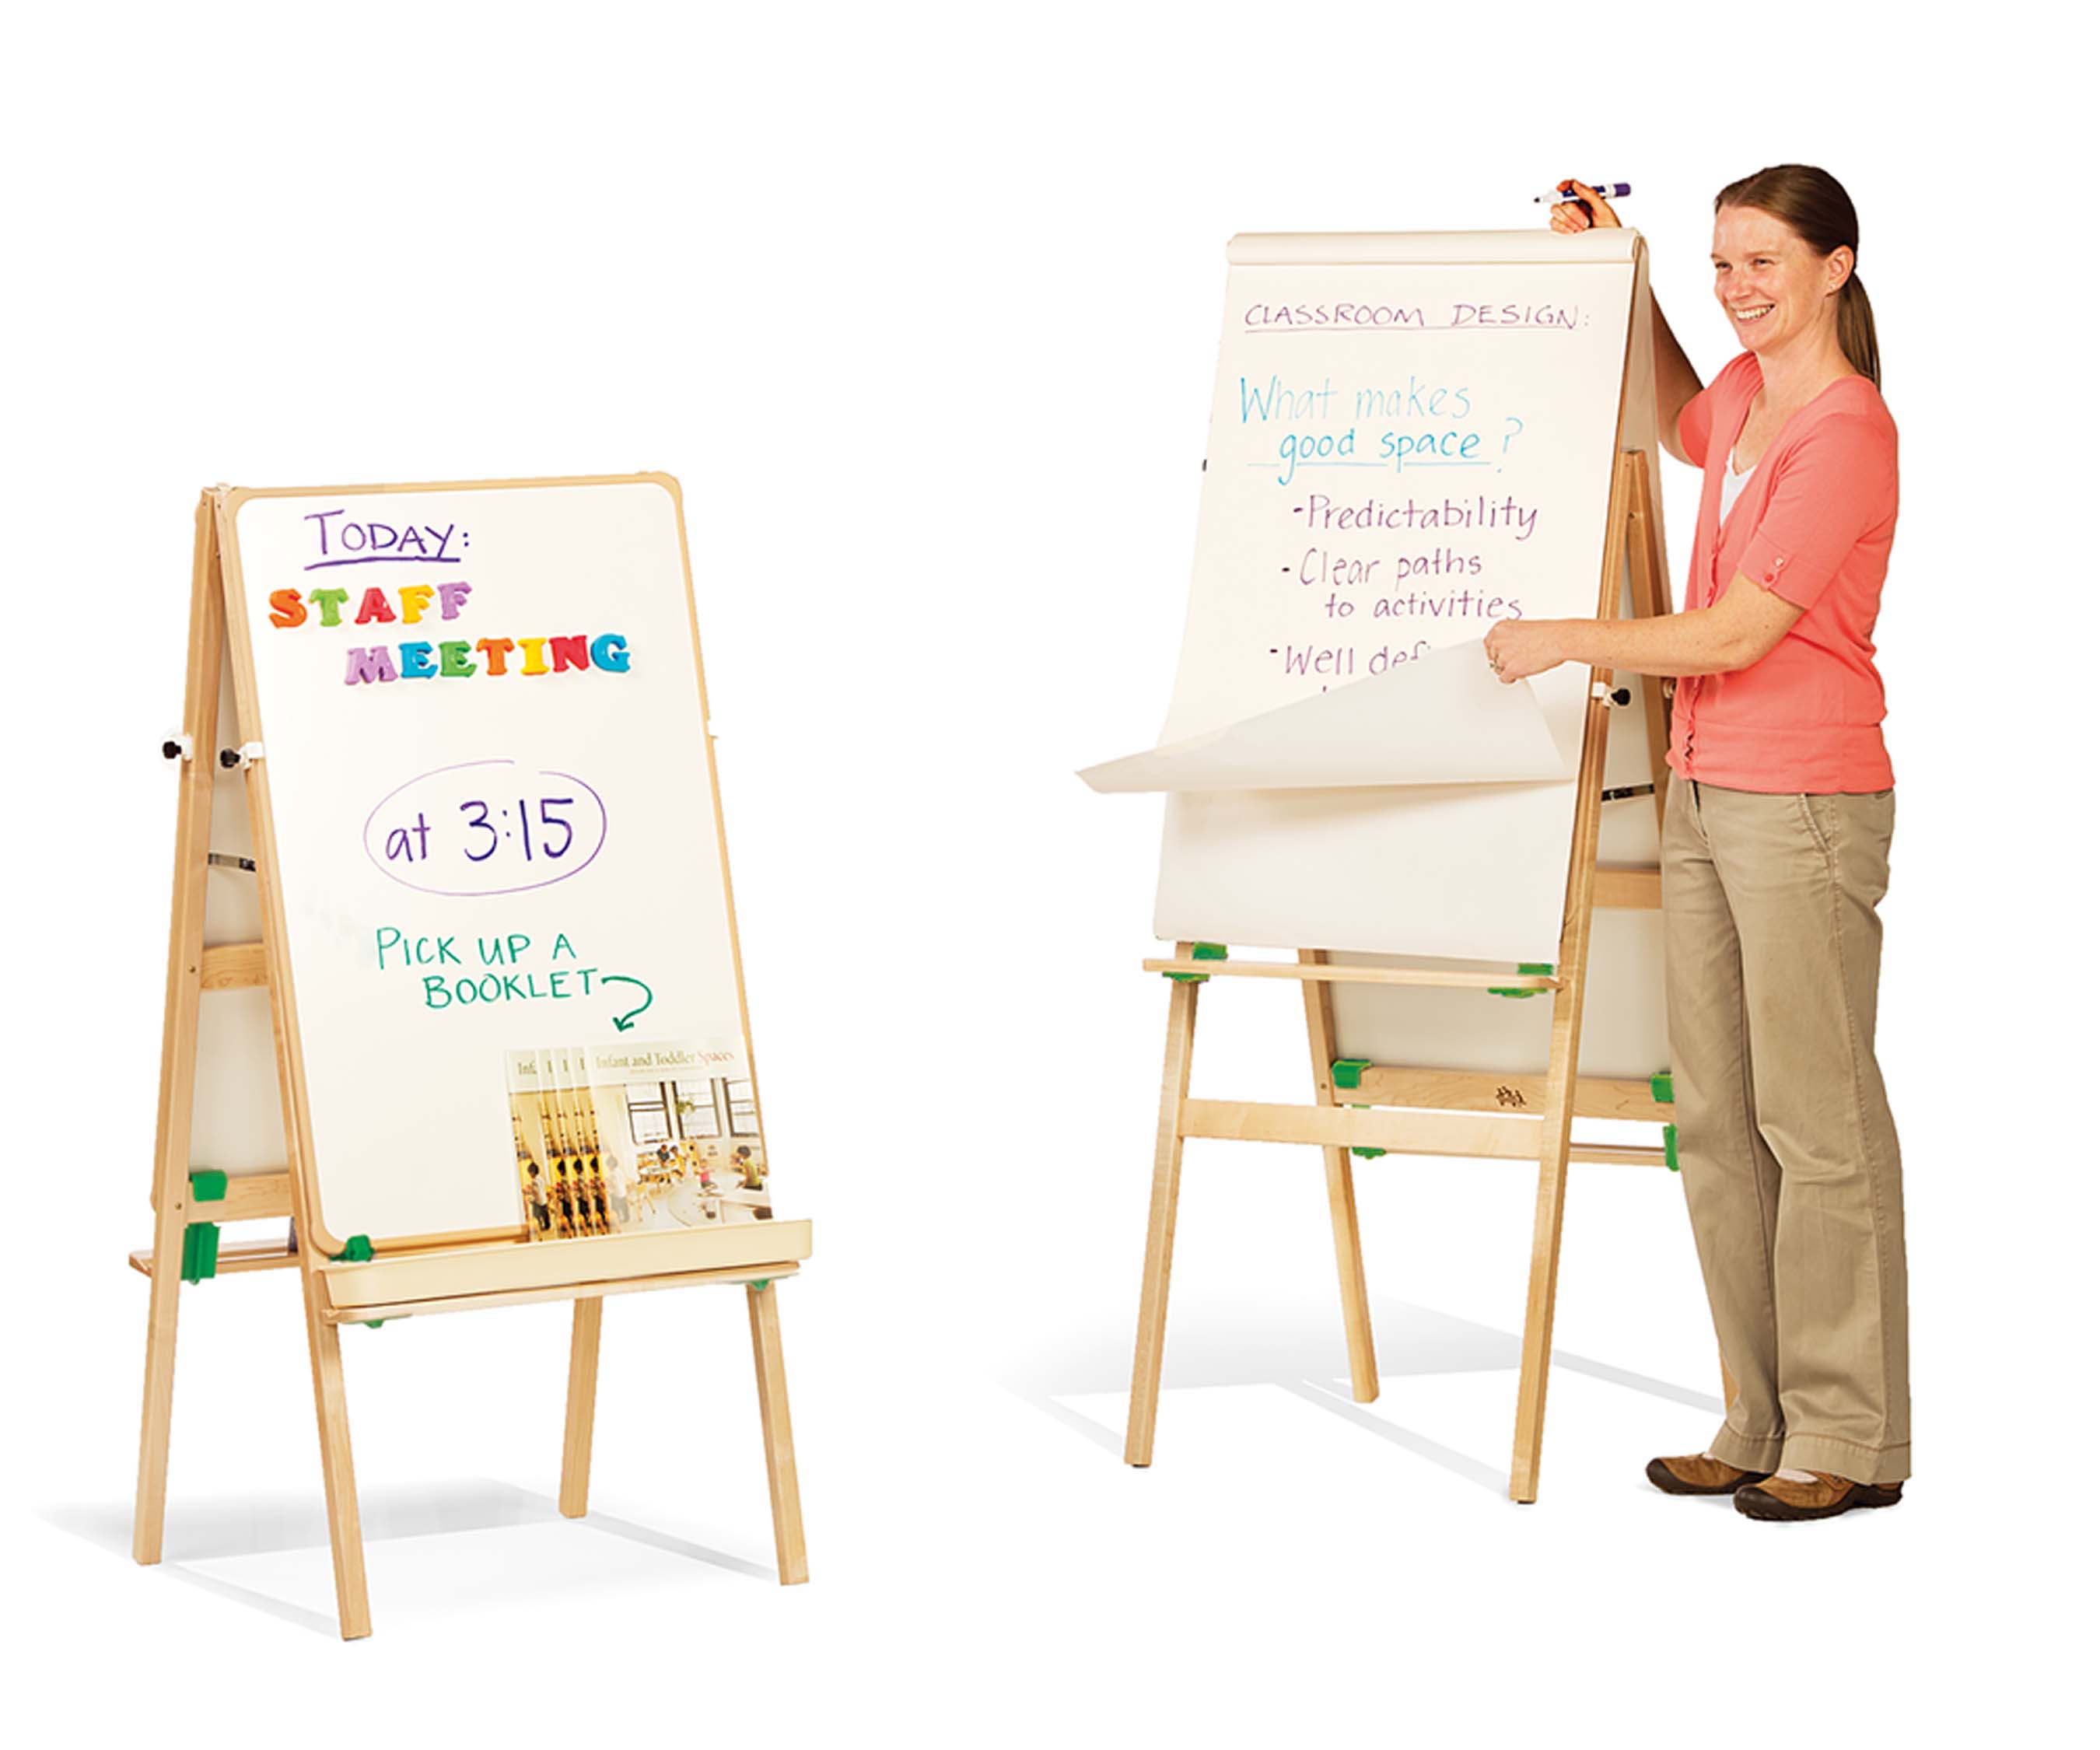 A practitioner flipping a chart on an easel